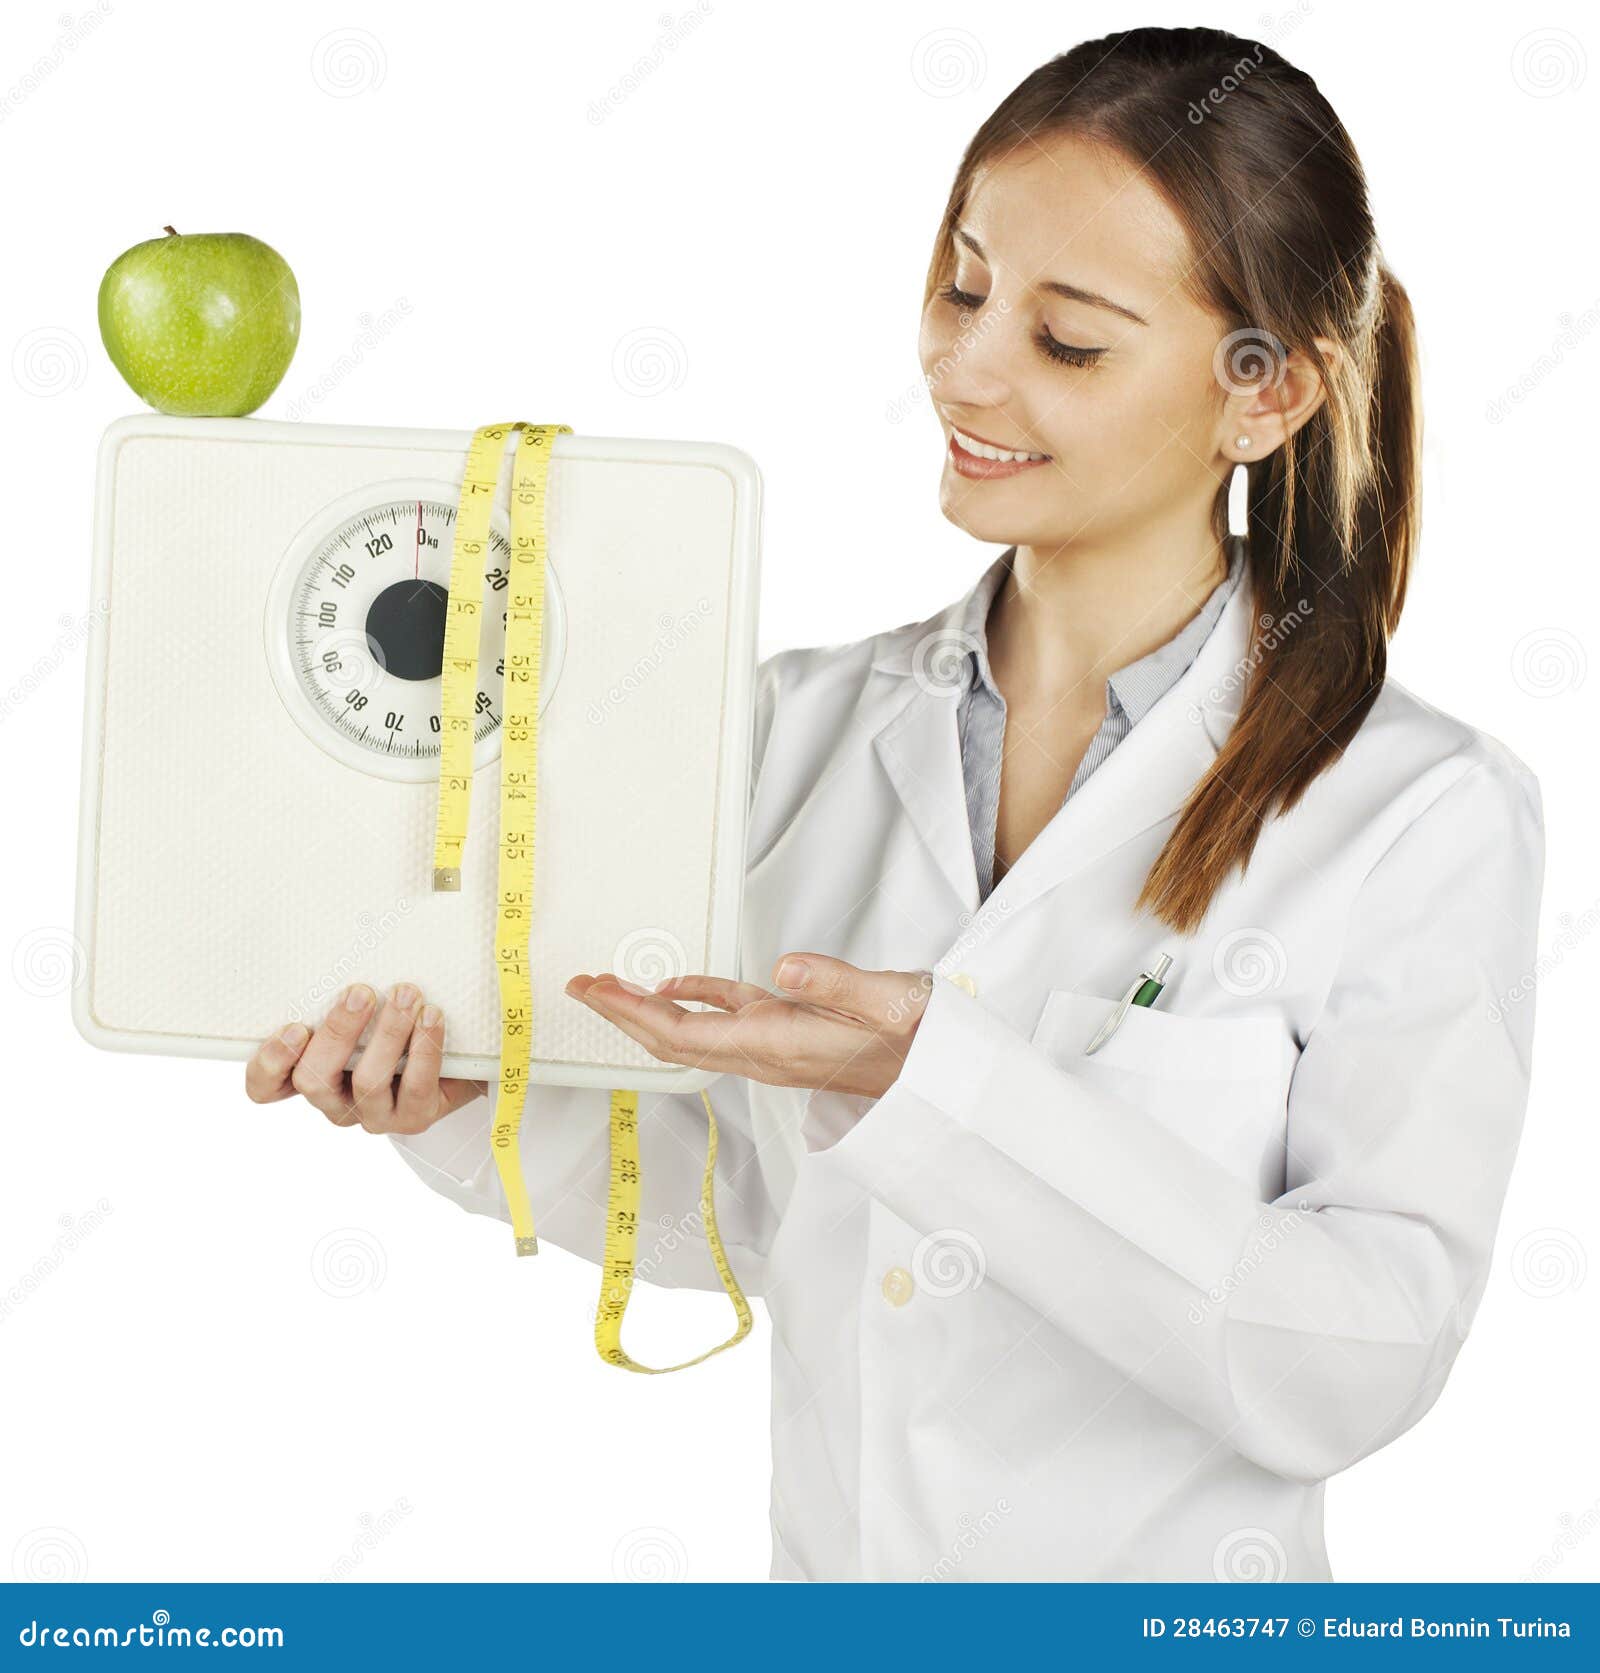 weight scales calories eating eat eats apple healthy health model design  Stock Photo - Alamy